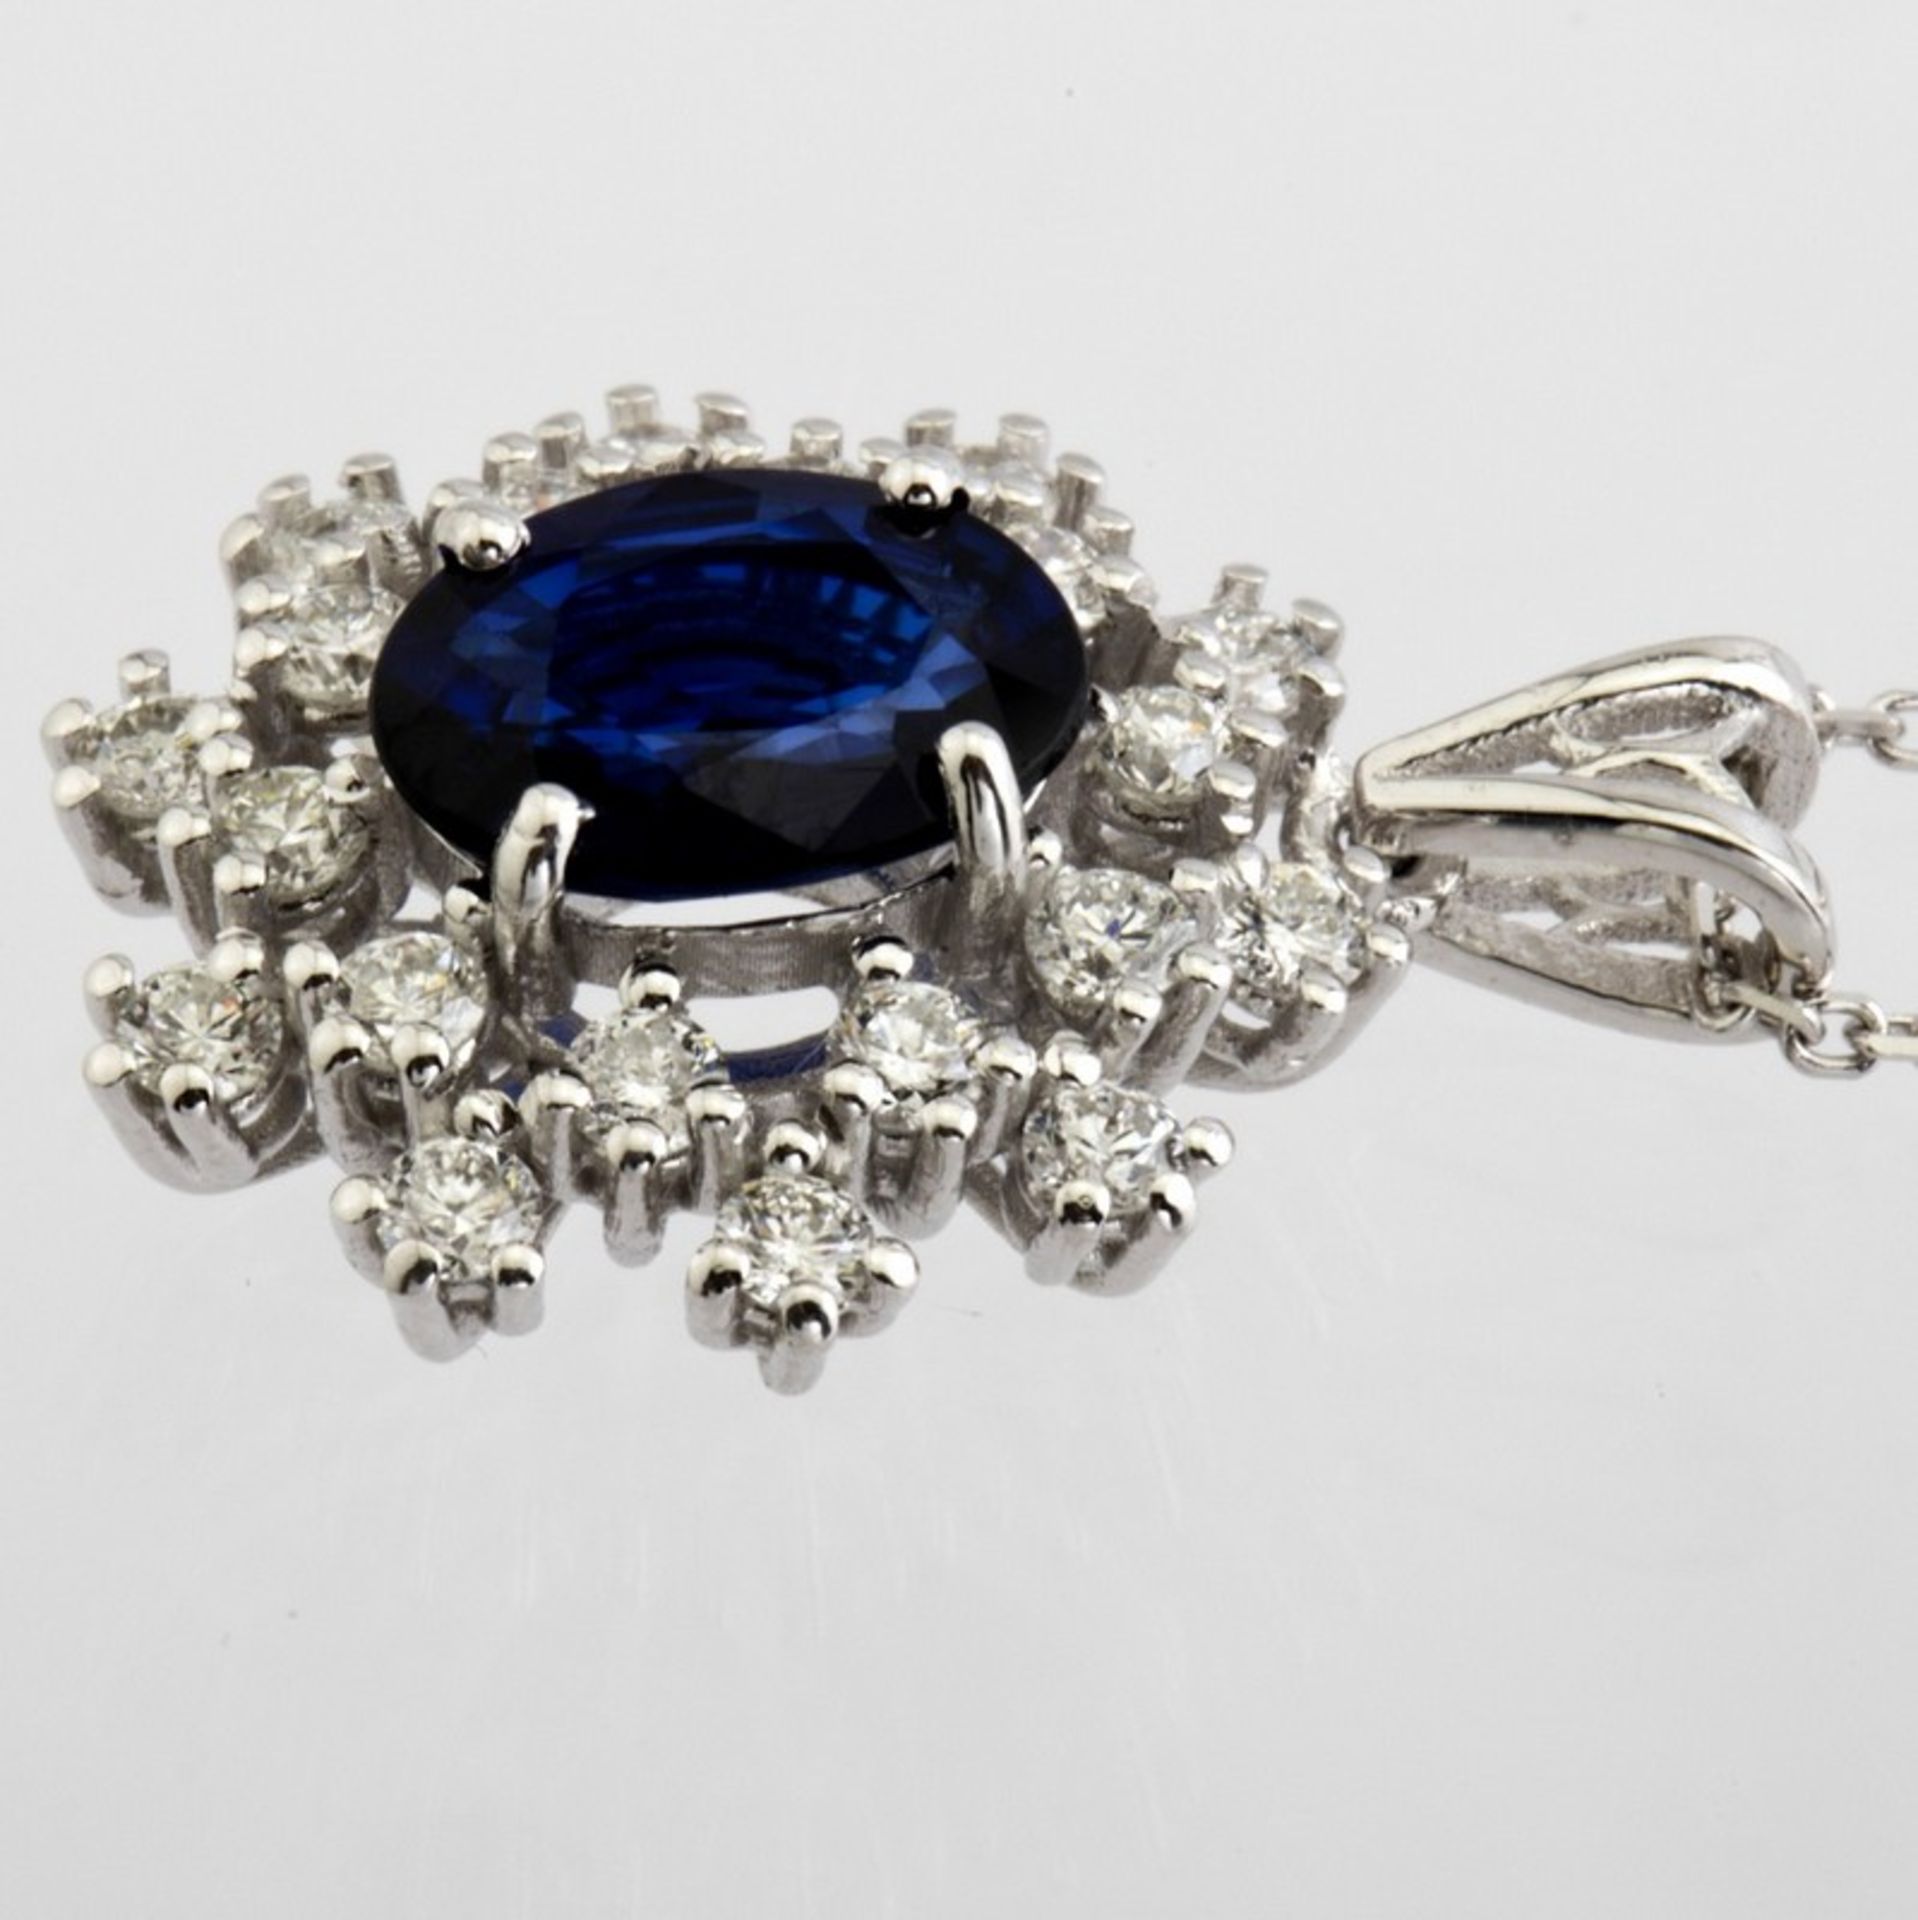 18K White Gold Sapphire Cluster Pendant Necklace Total 1.77 ct - Image 7 of 9